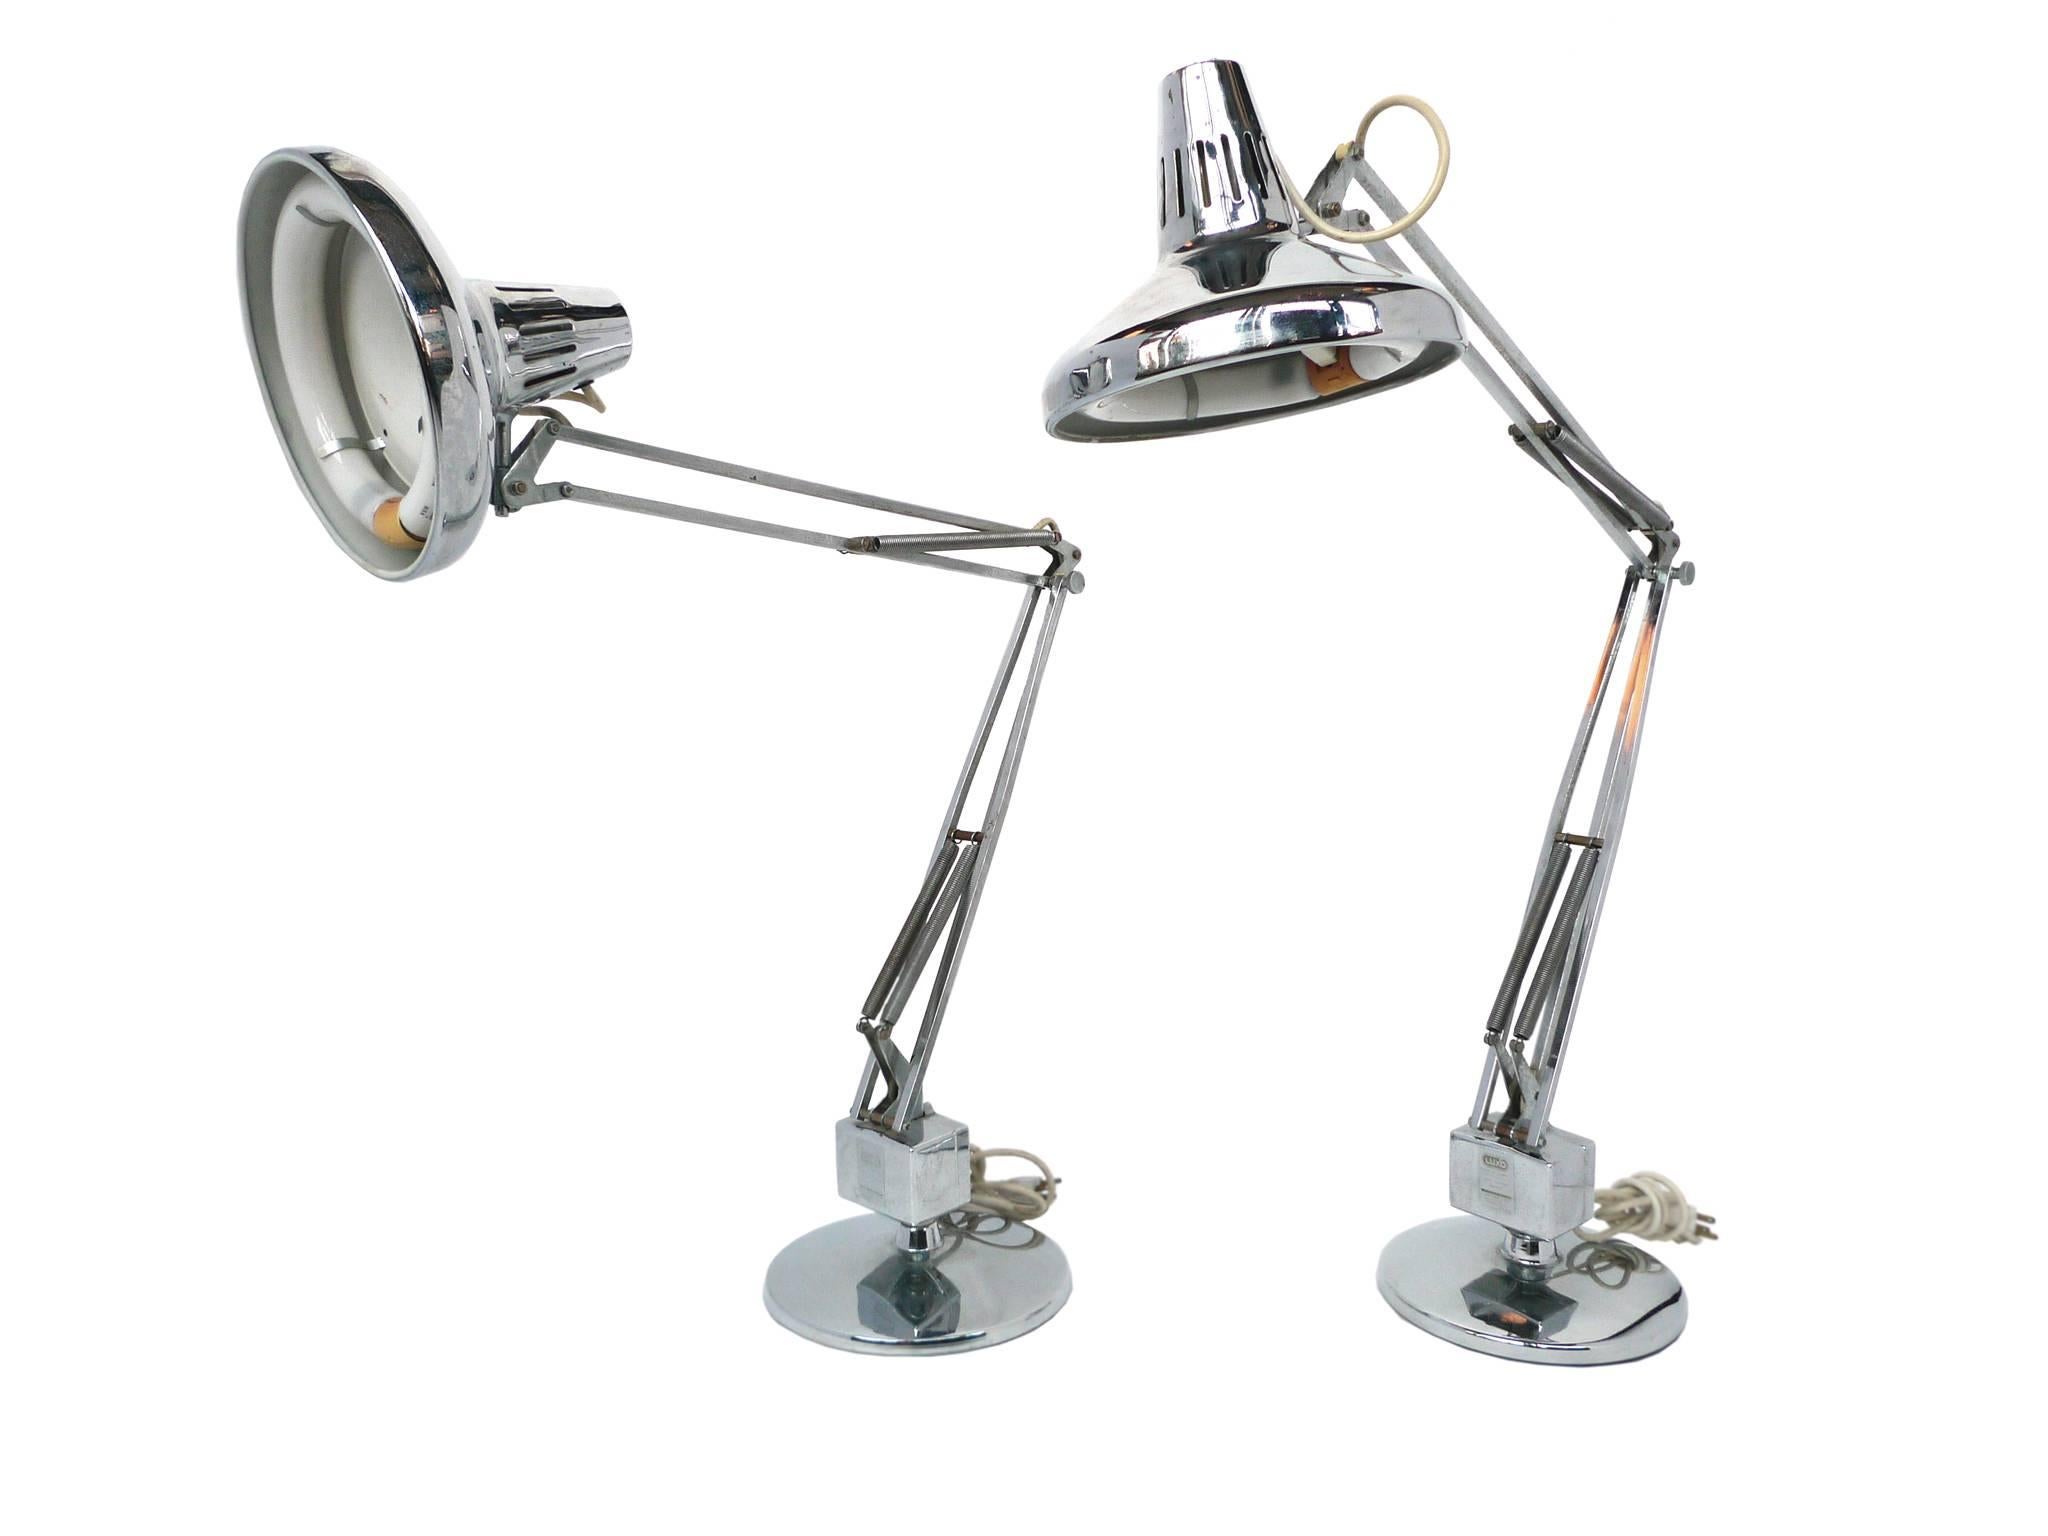 These iconic Luxo chrome desk lamps are articulated and can be adjusted in height and length. They also rotate at the base. 

Note that the measurements listed indicate the diameter of the base (9 inches) and the height of each lamp at its most